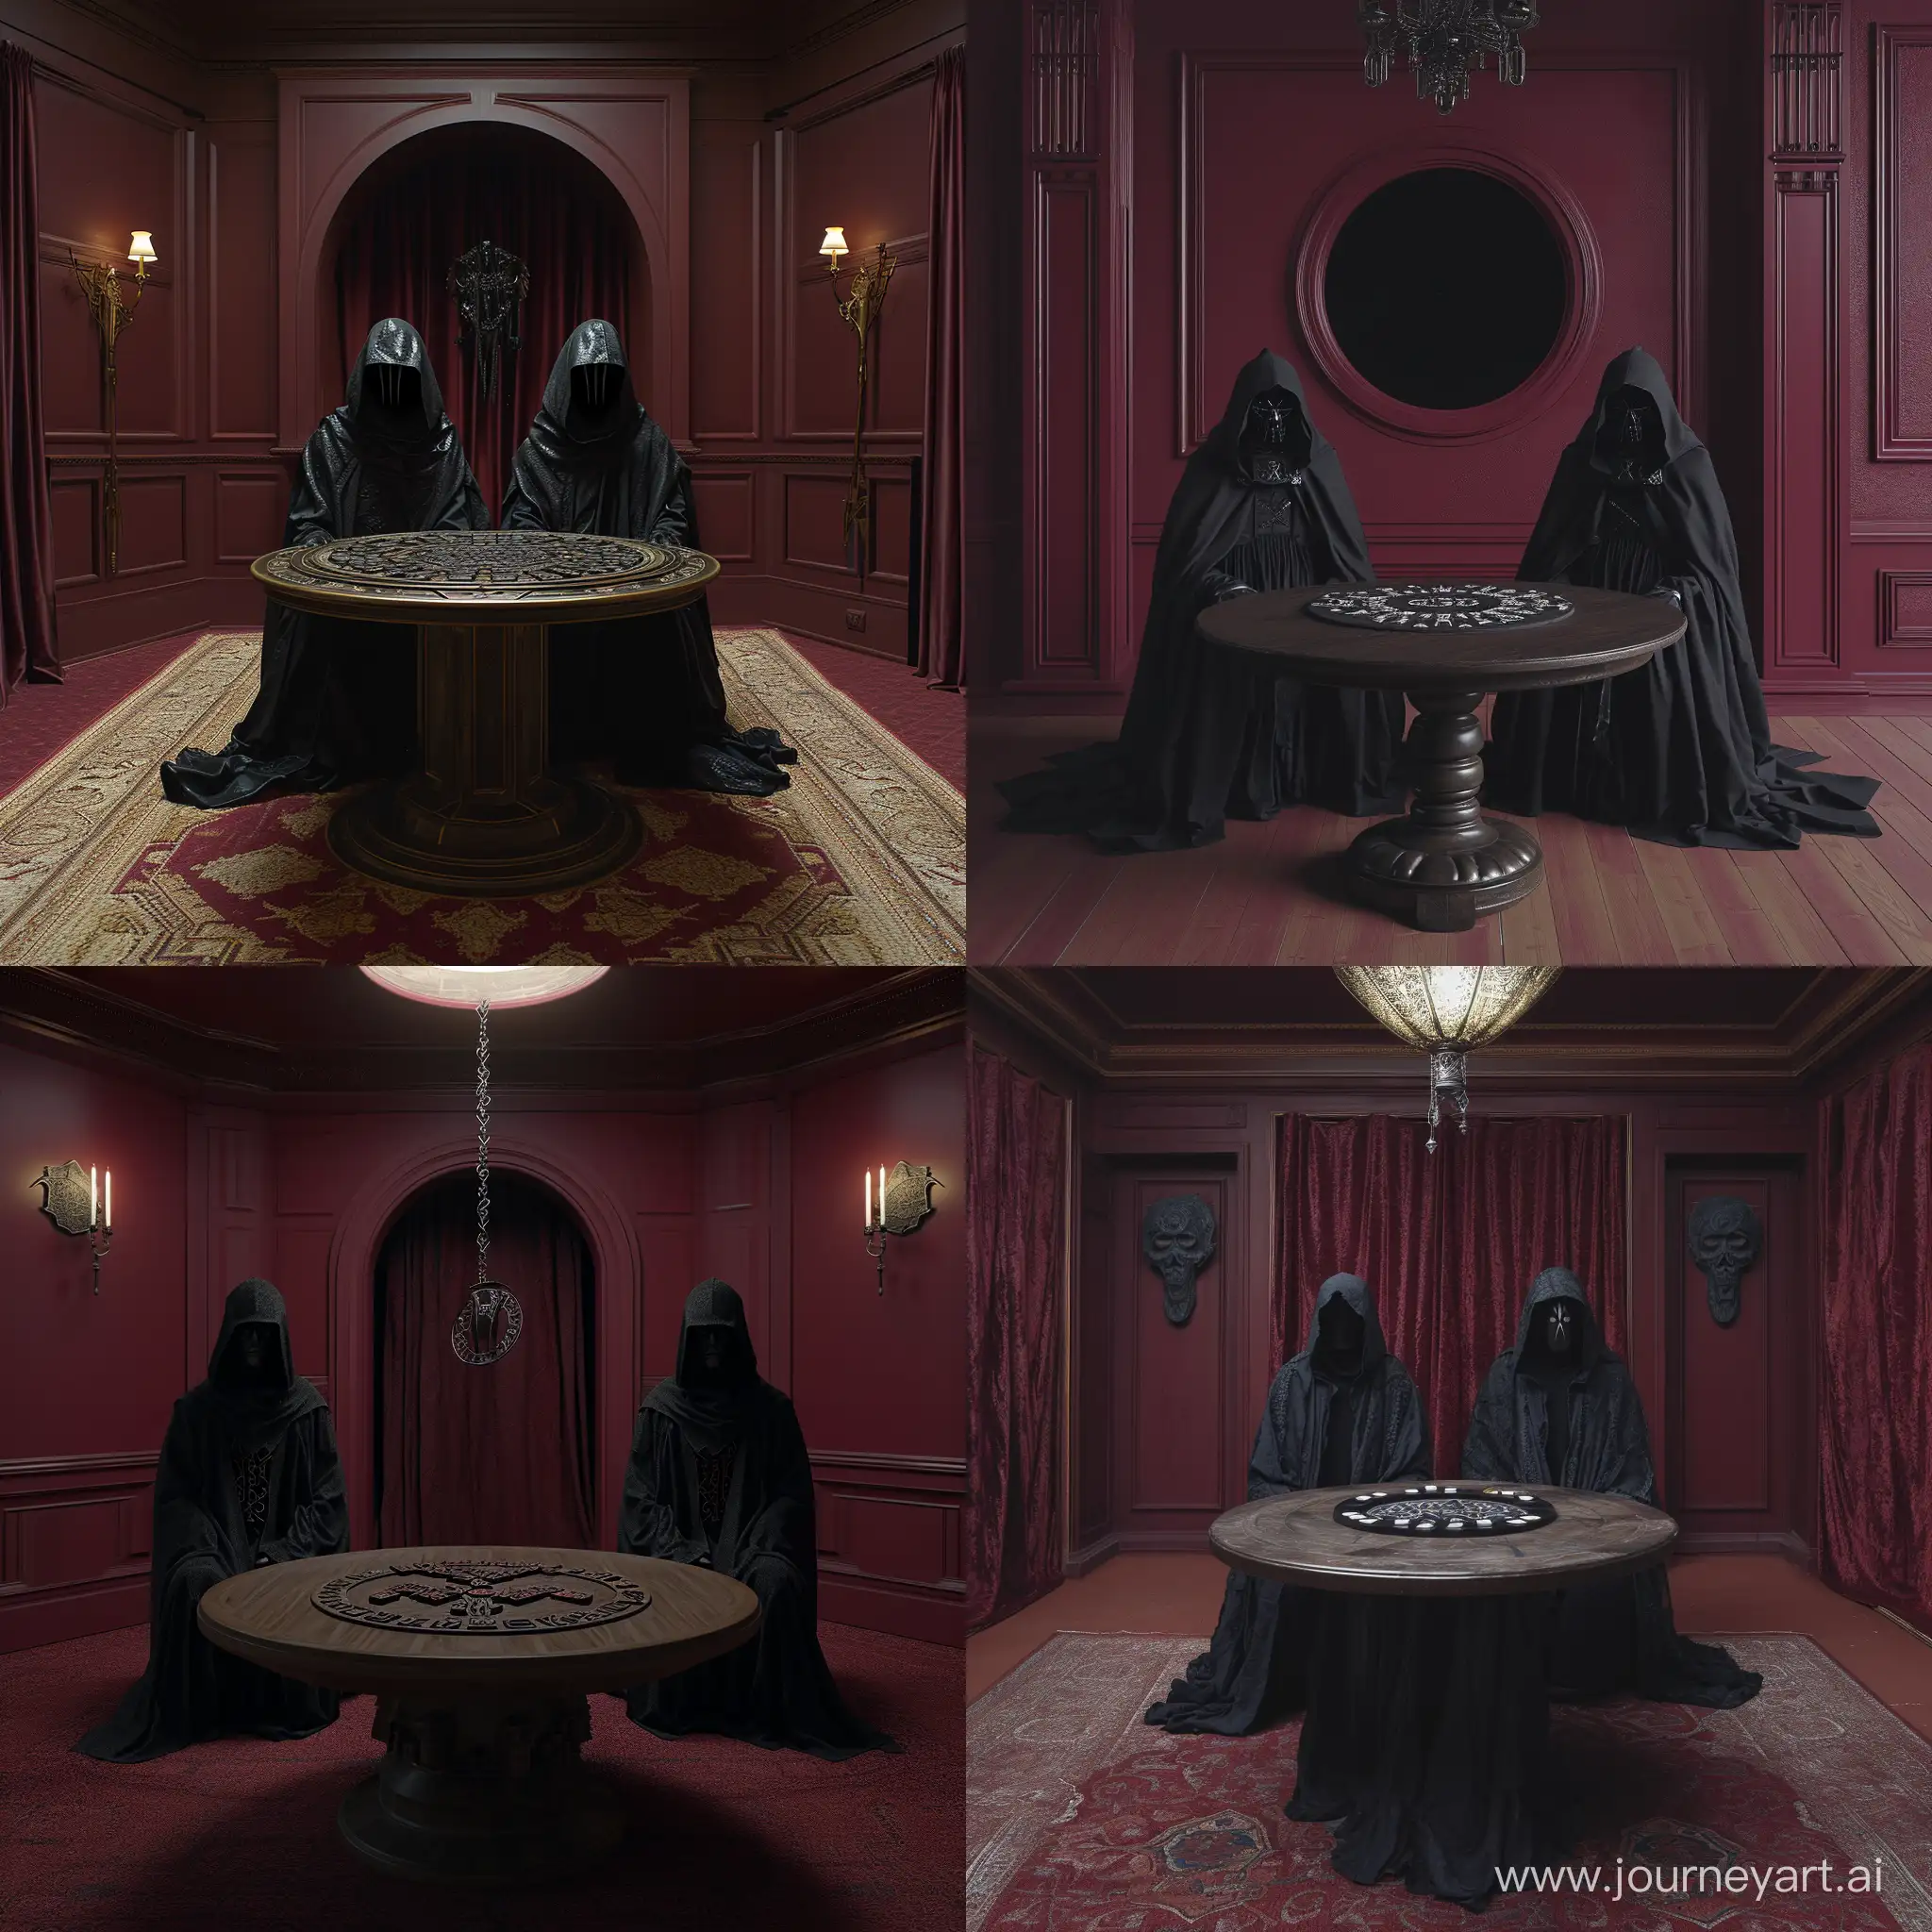 Mysterious-Ritual-in-Spacious-Burgundy-Room-with-Faceless-Figures